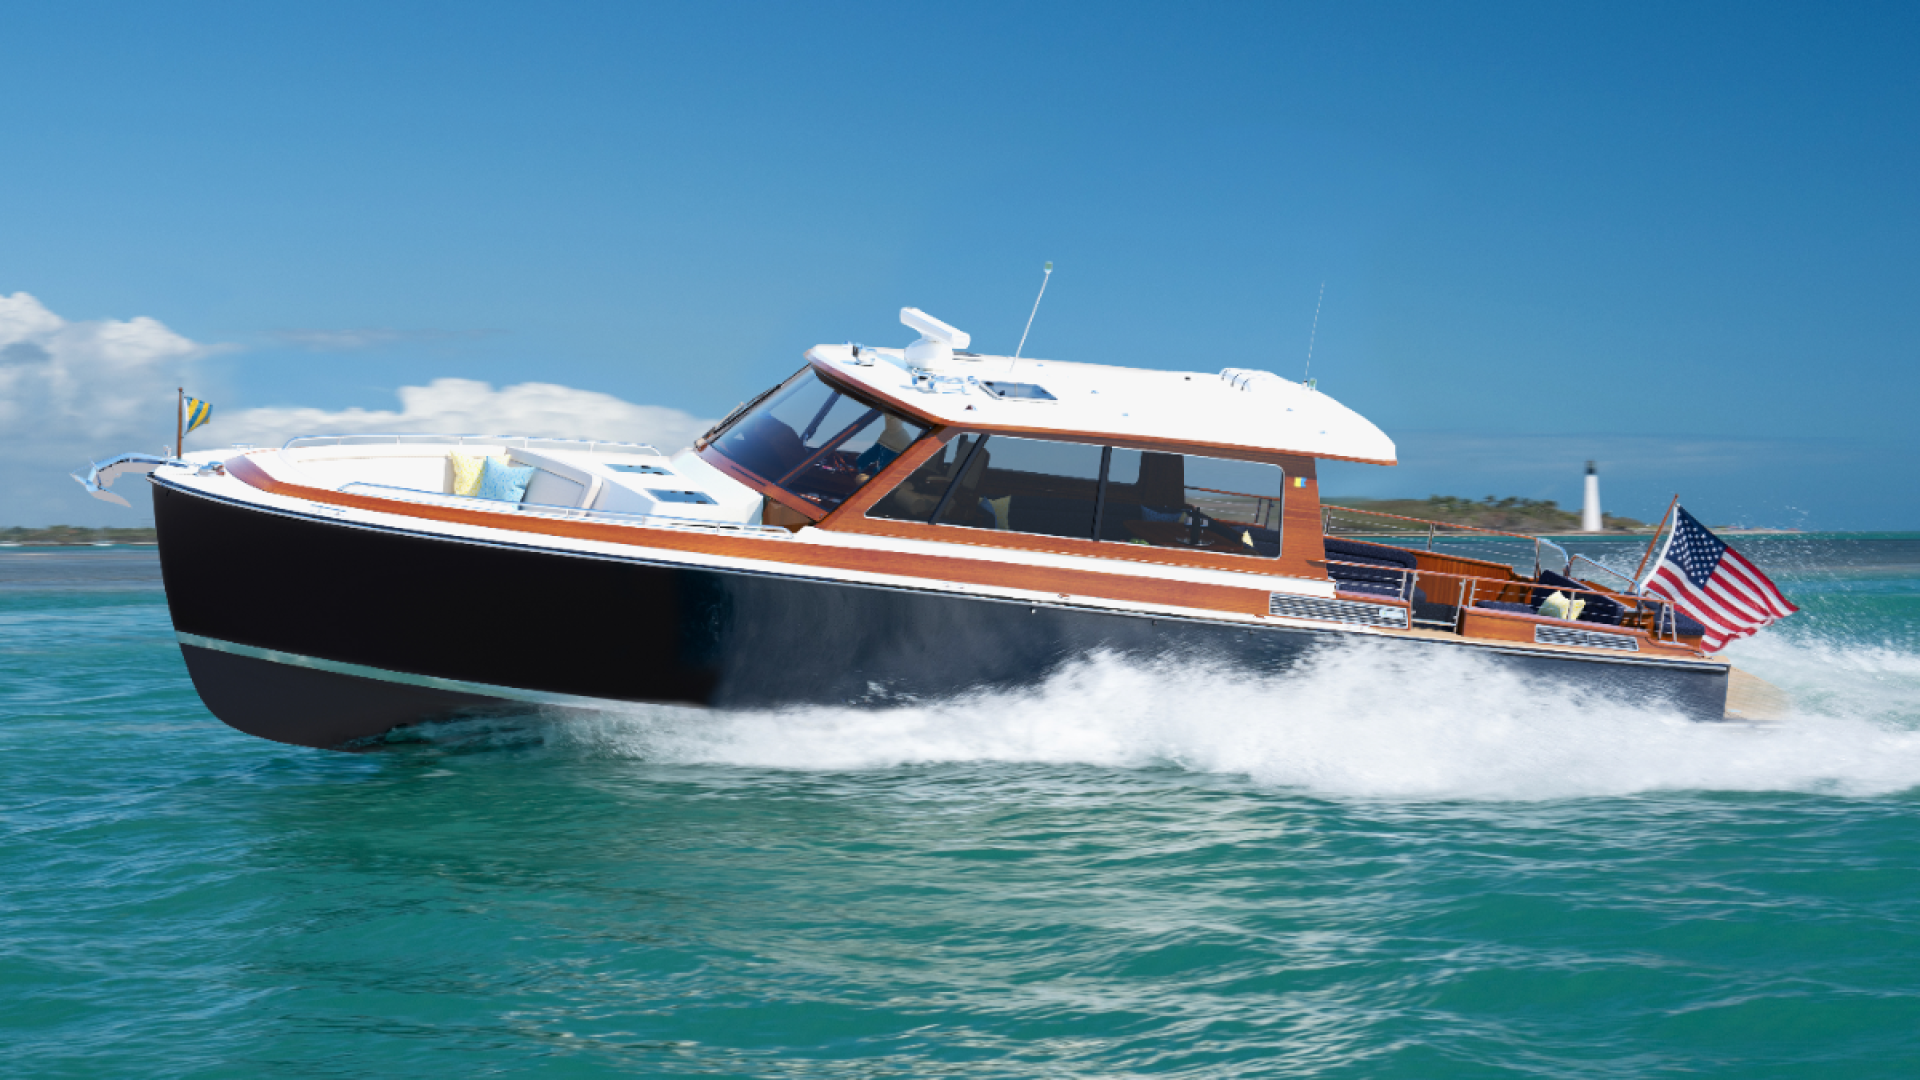 New versatile Daychaser 48 by Zurn Yacht Design to be launched by Boston Boatworks this spring